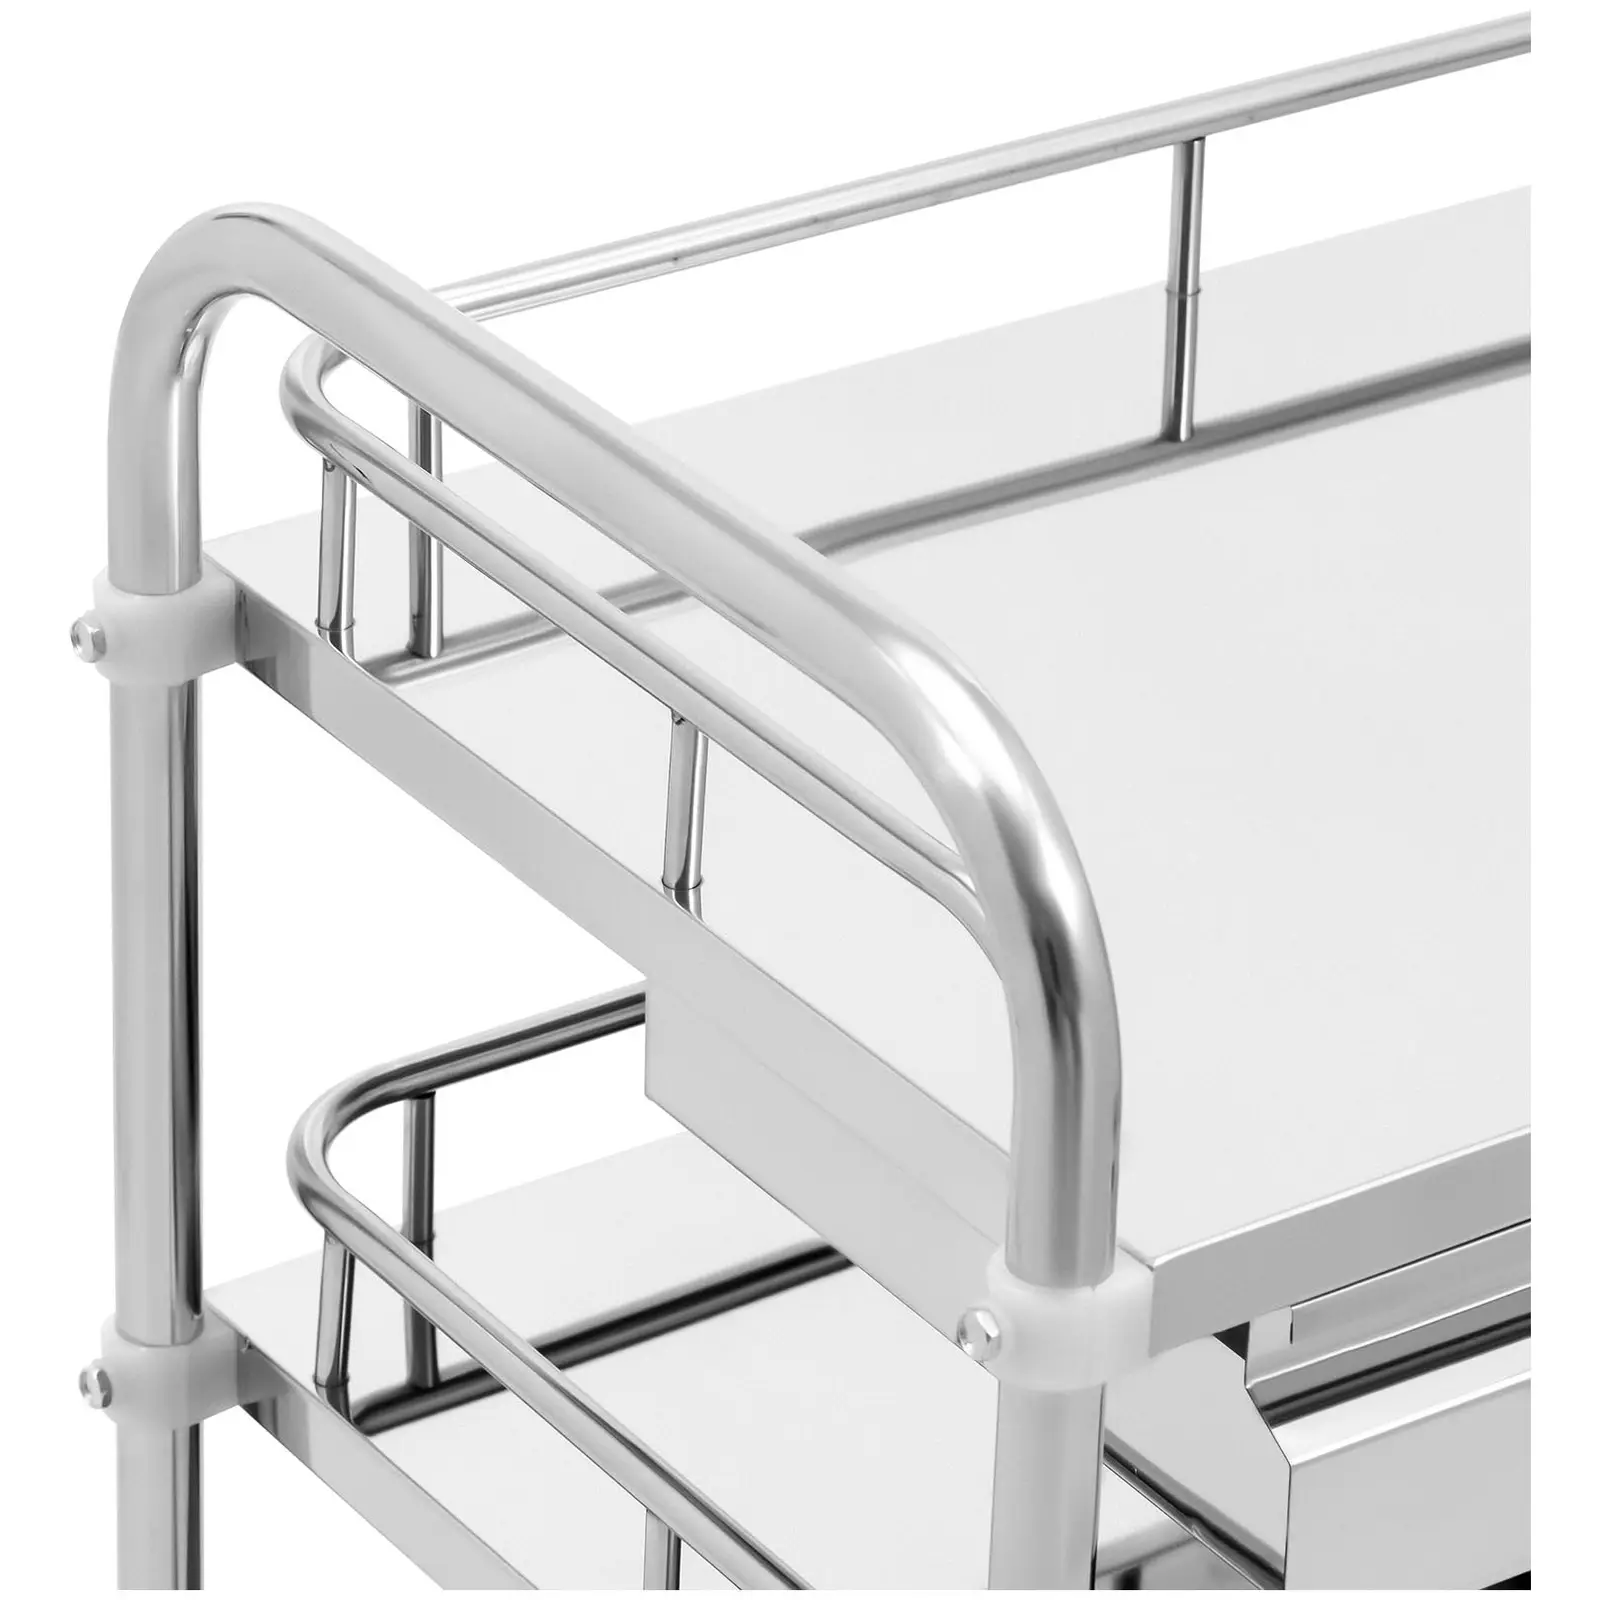 Laboratory Trolley - stainless steel - 3 shelves each 60 x 40 x 13 cm - 2 drawers - 15 kg